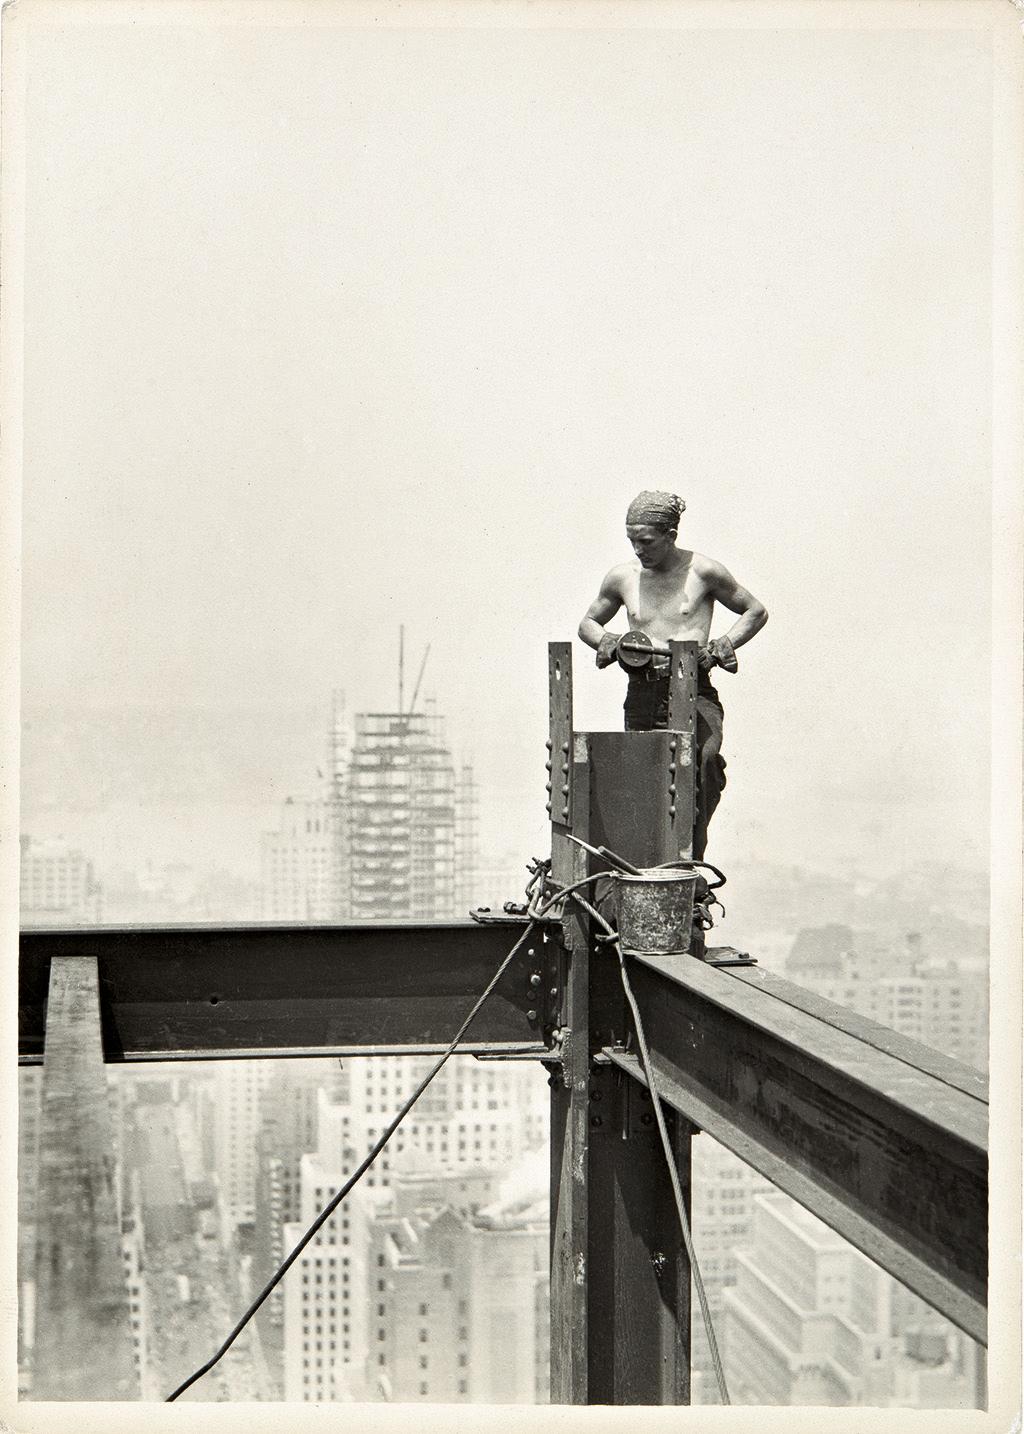 Empire State Building, 1931